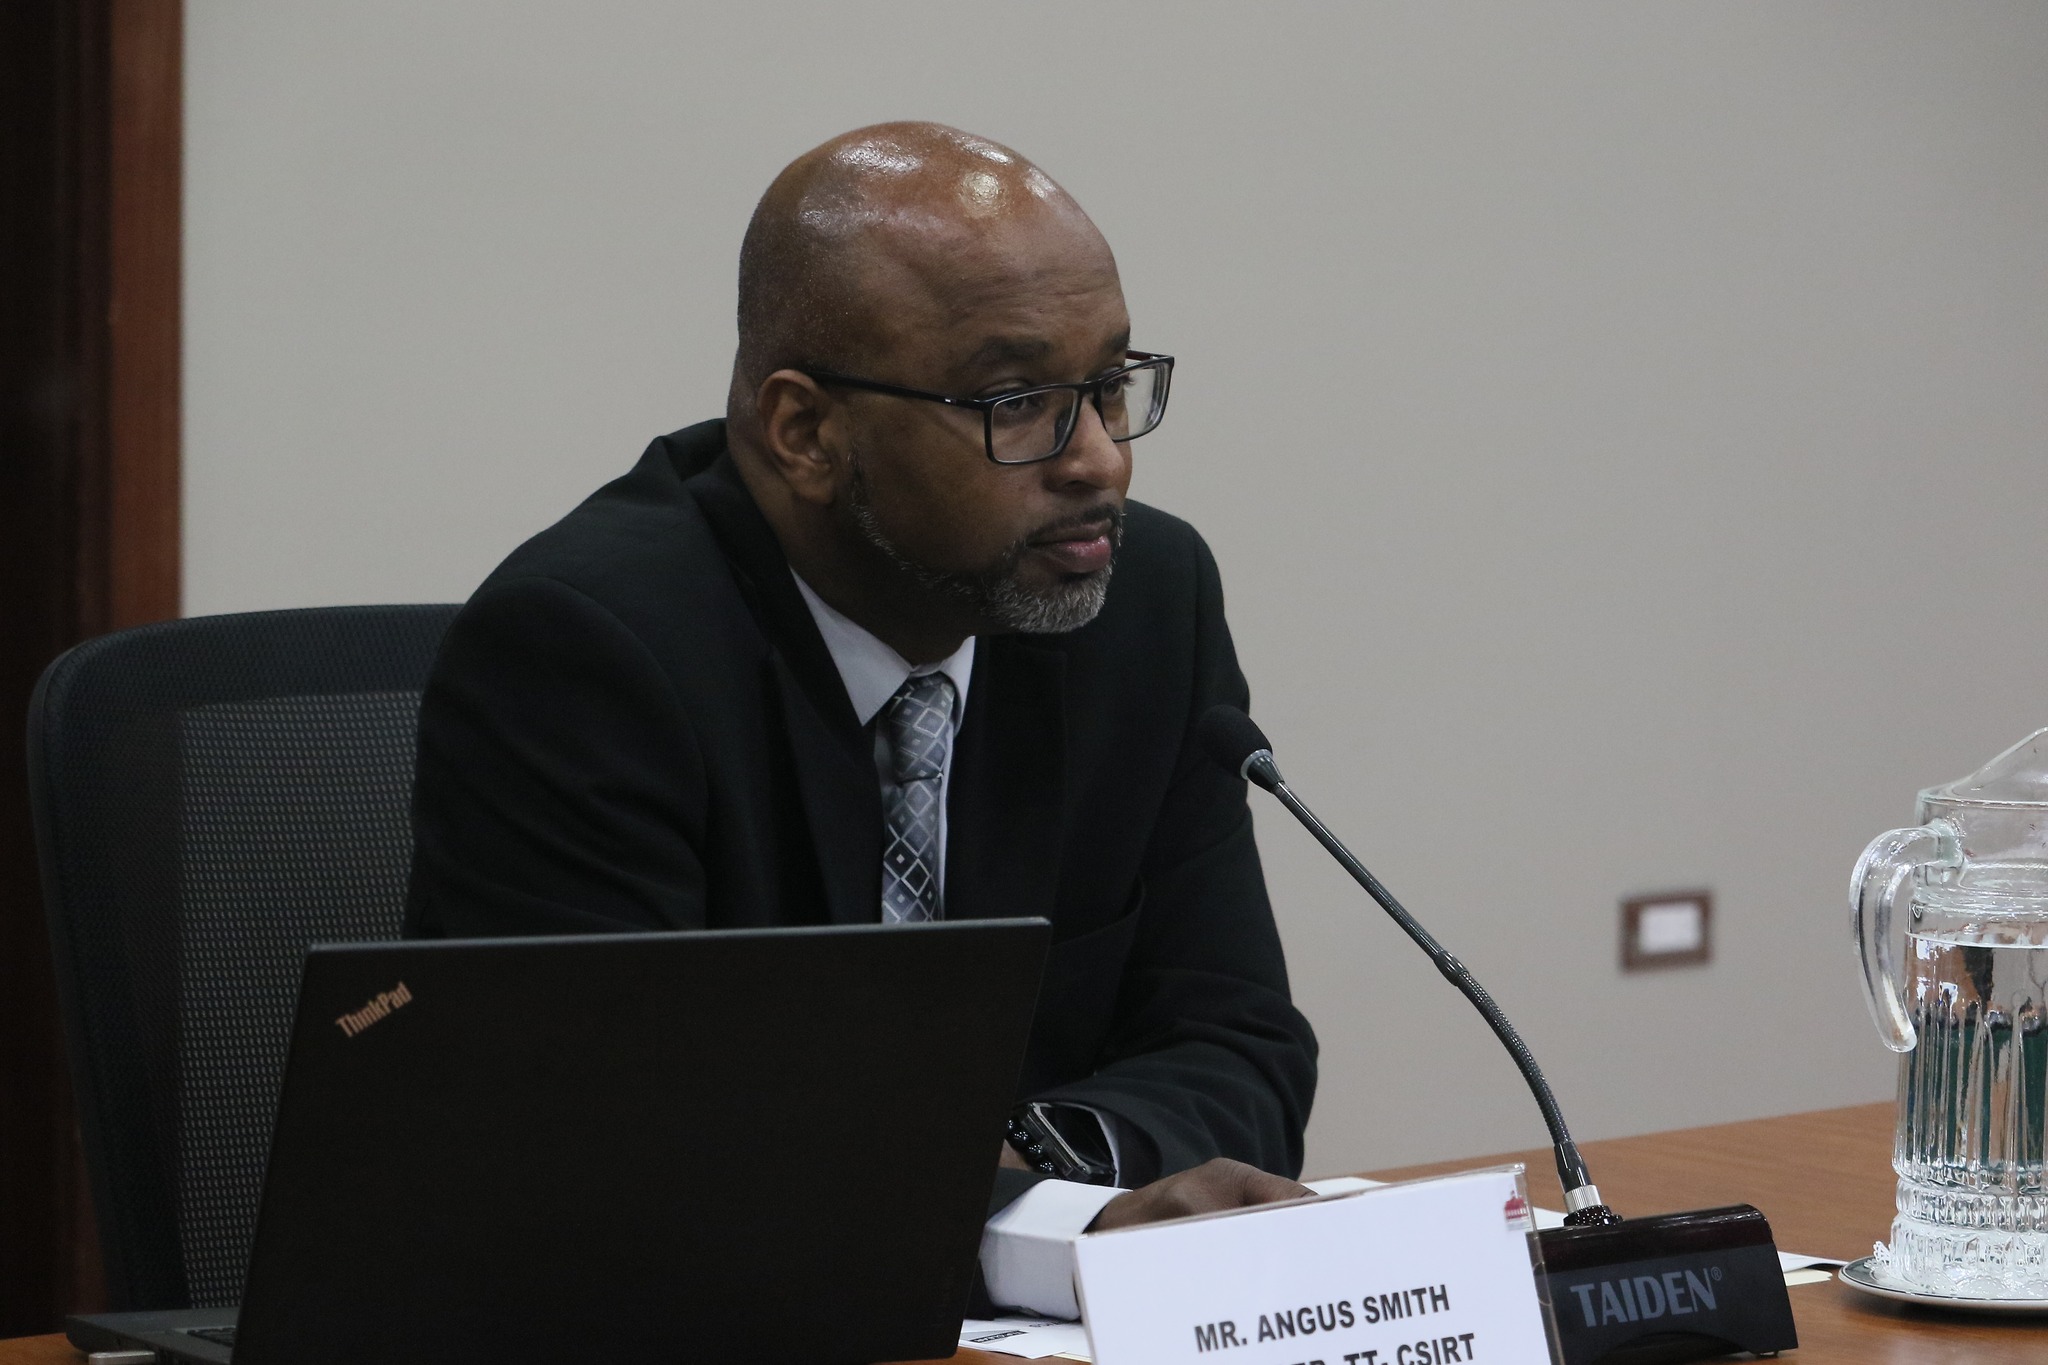 T&T has had over 200 cyberattacks since 2019